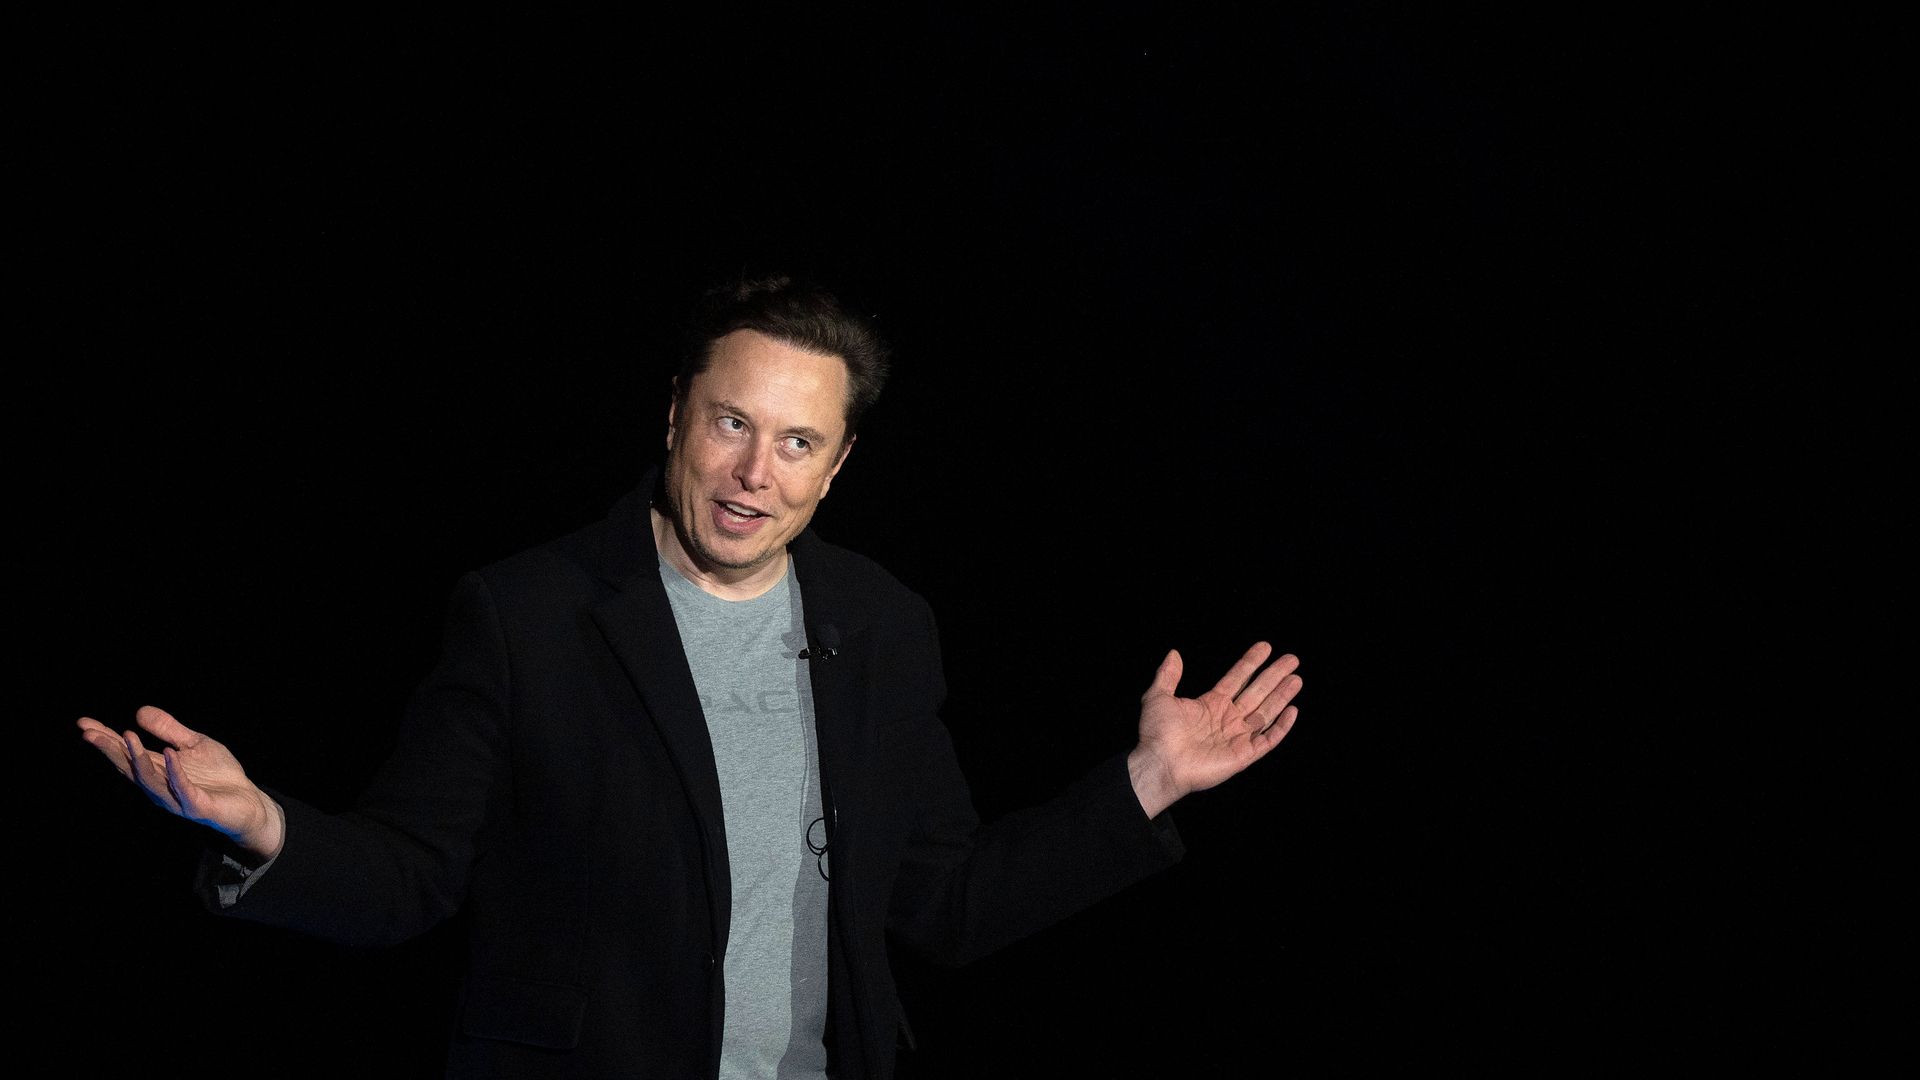 Elon Musk gestures as he speaks during a press conference at SpaceX's Starbase facility.